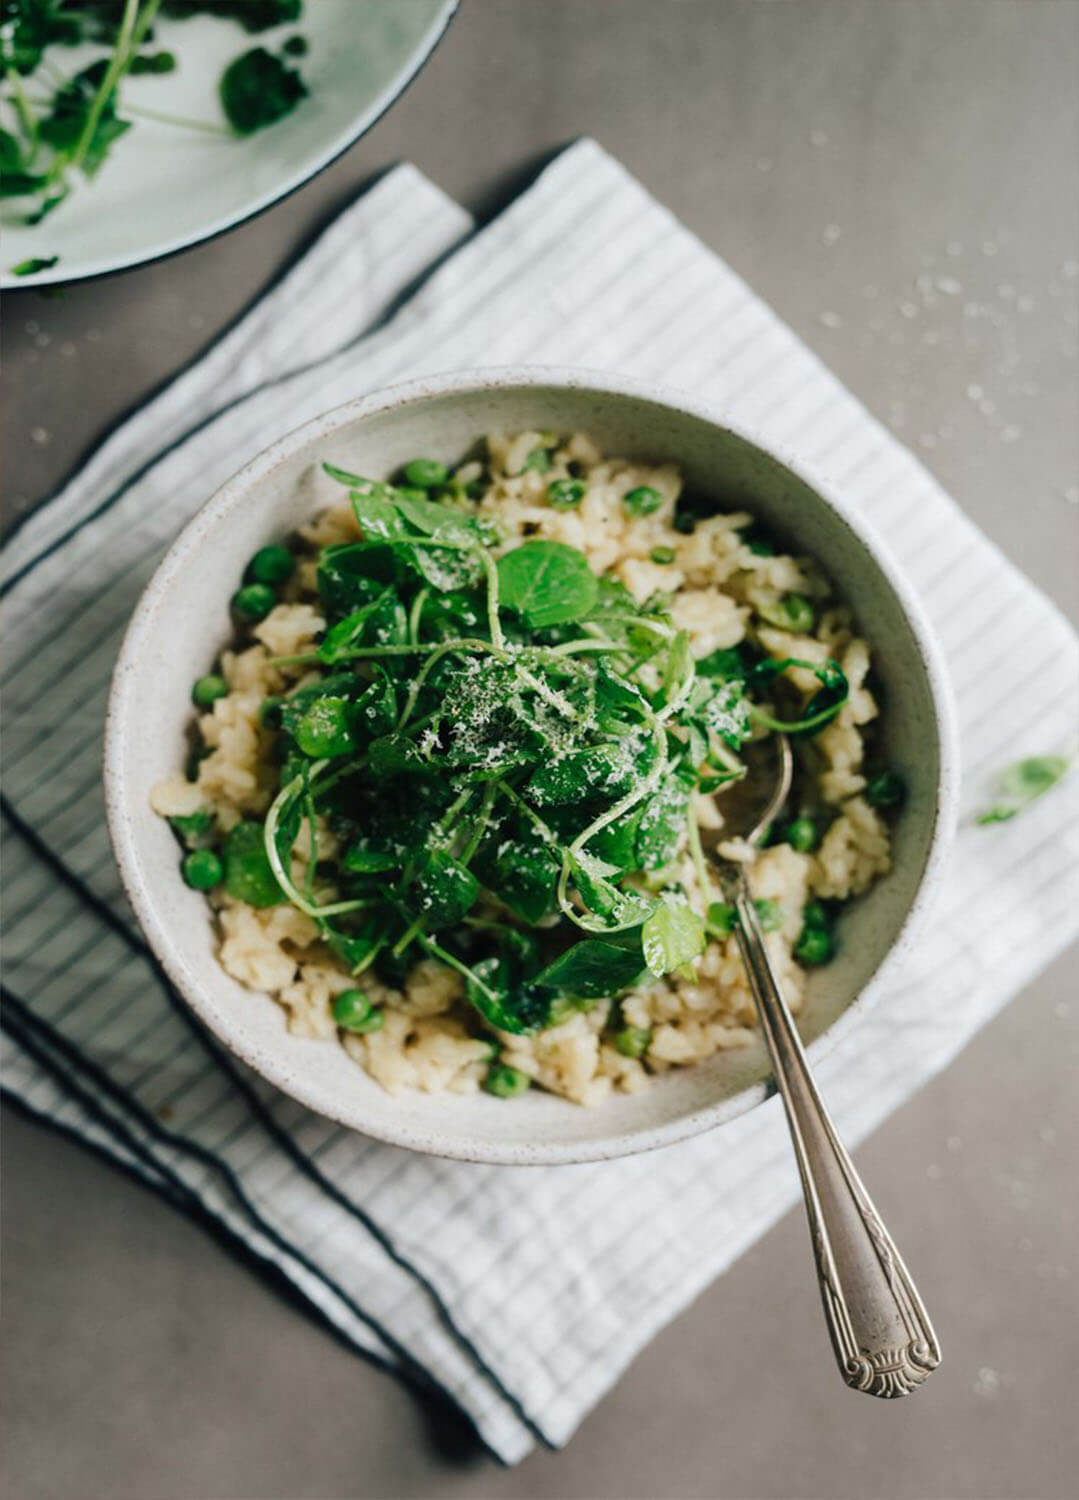 SWEET PEA OVEN RISOTTO W/ GARLIC PEA SHOOTS